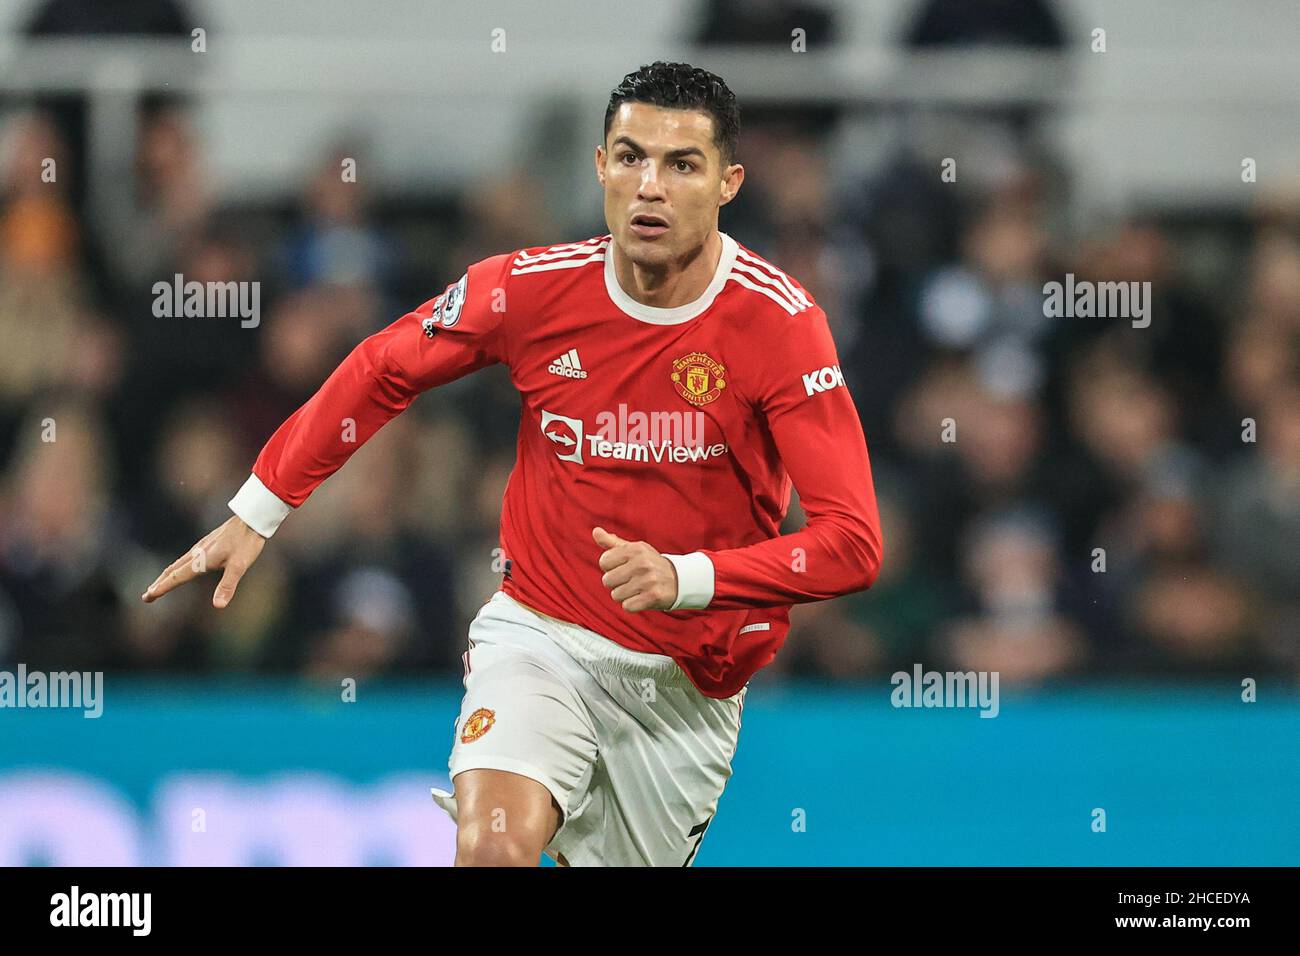 Cristiano Ronaldo #7 of Manchester United during the game Stock Photo